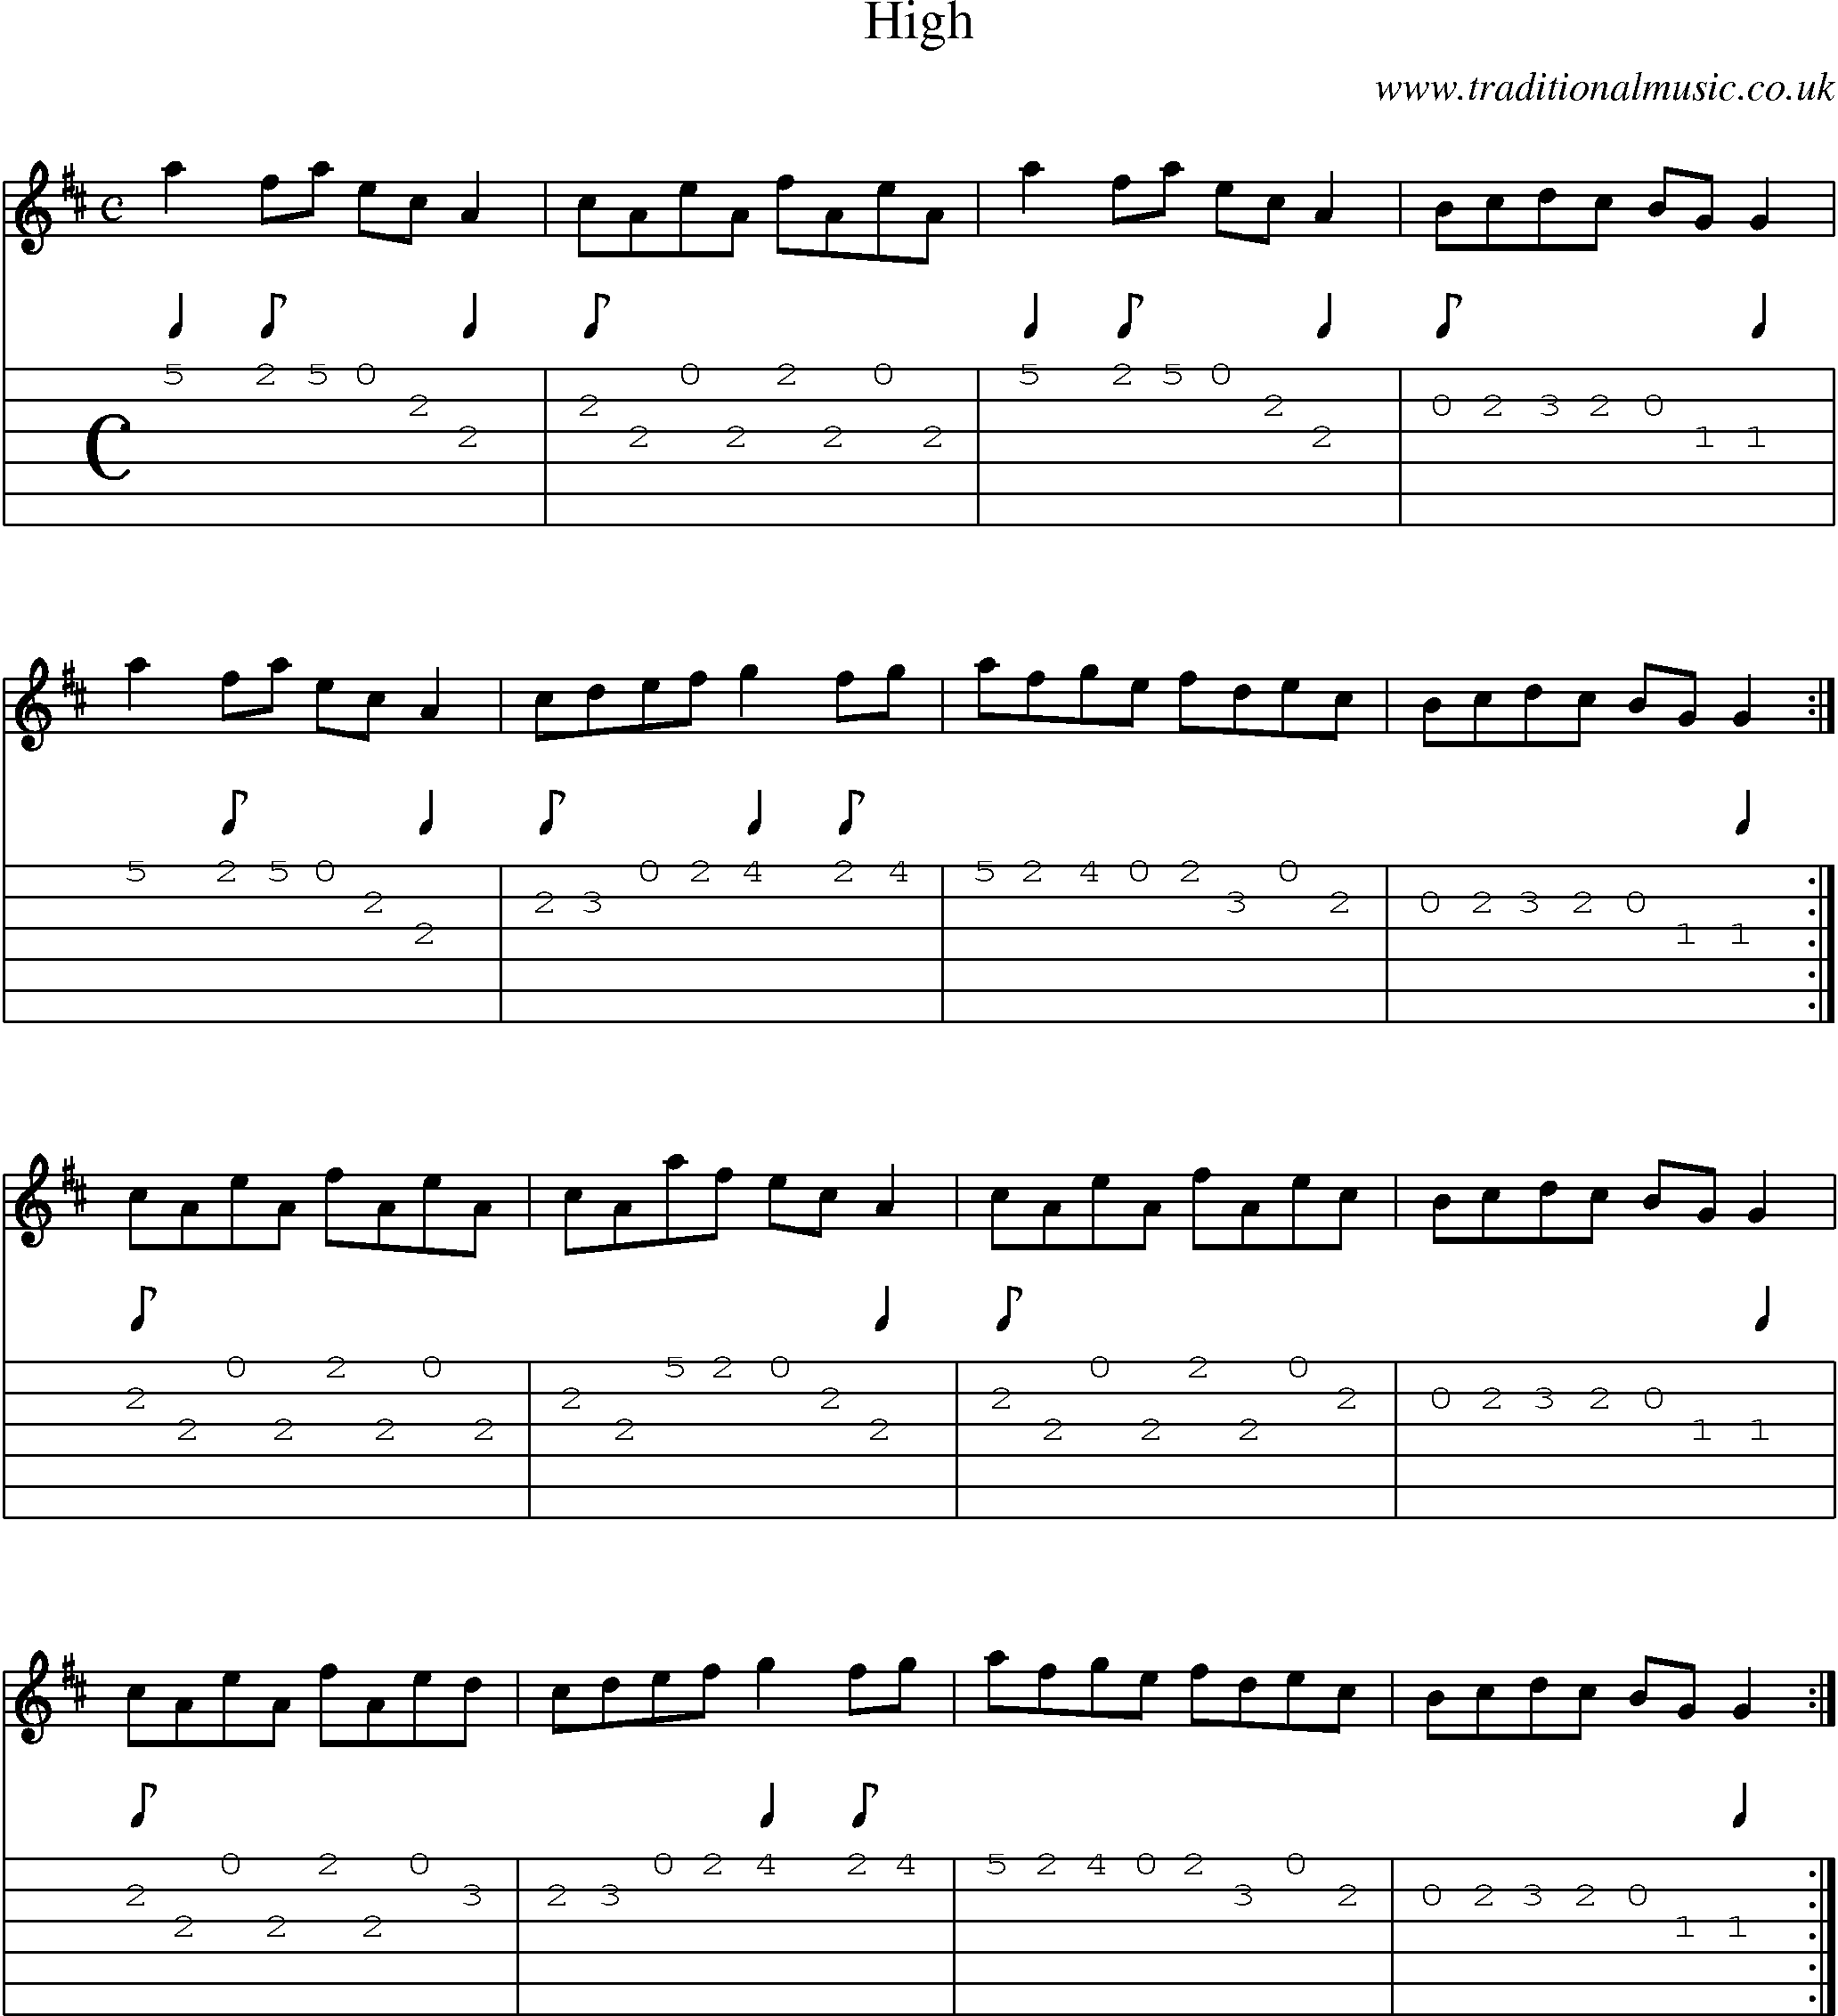 Music Score and Guitar Tabs for High